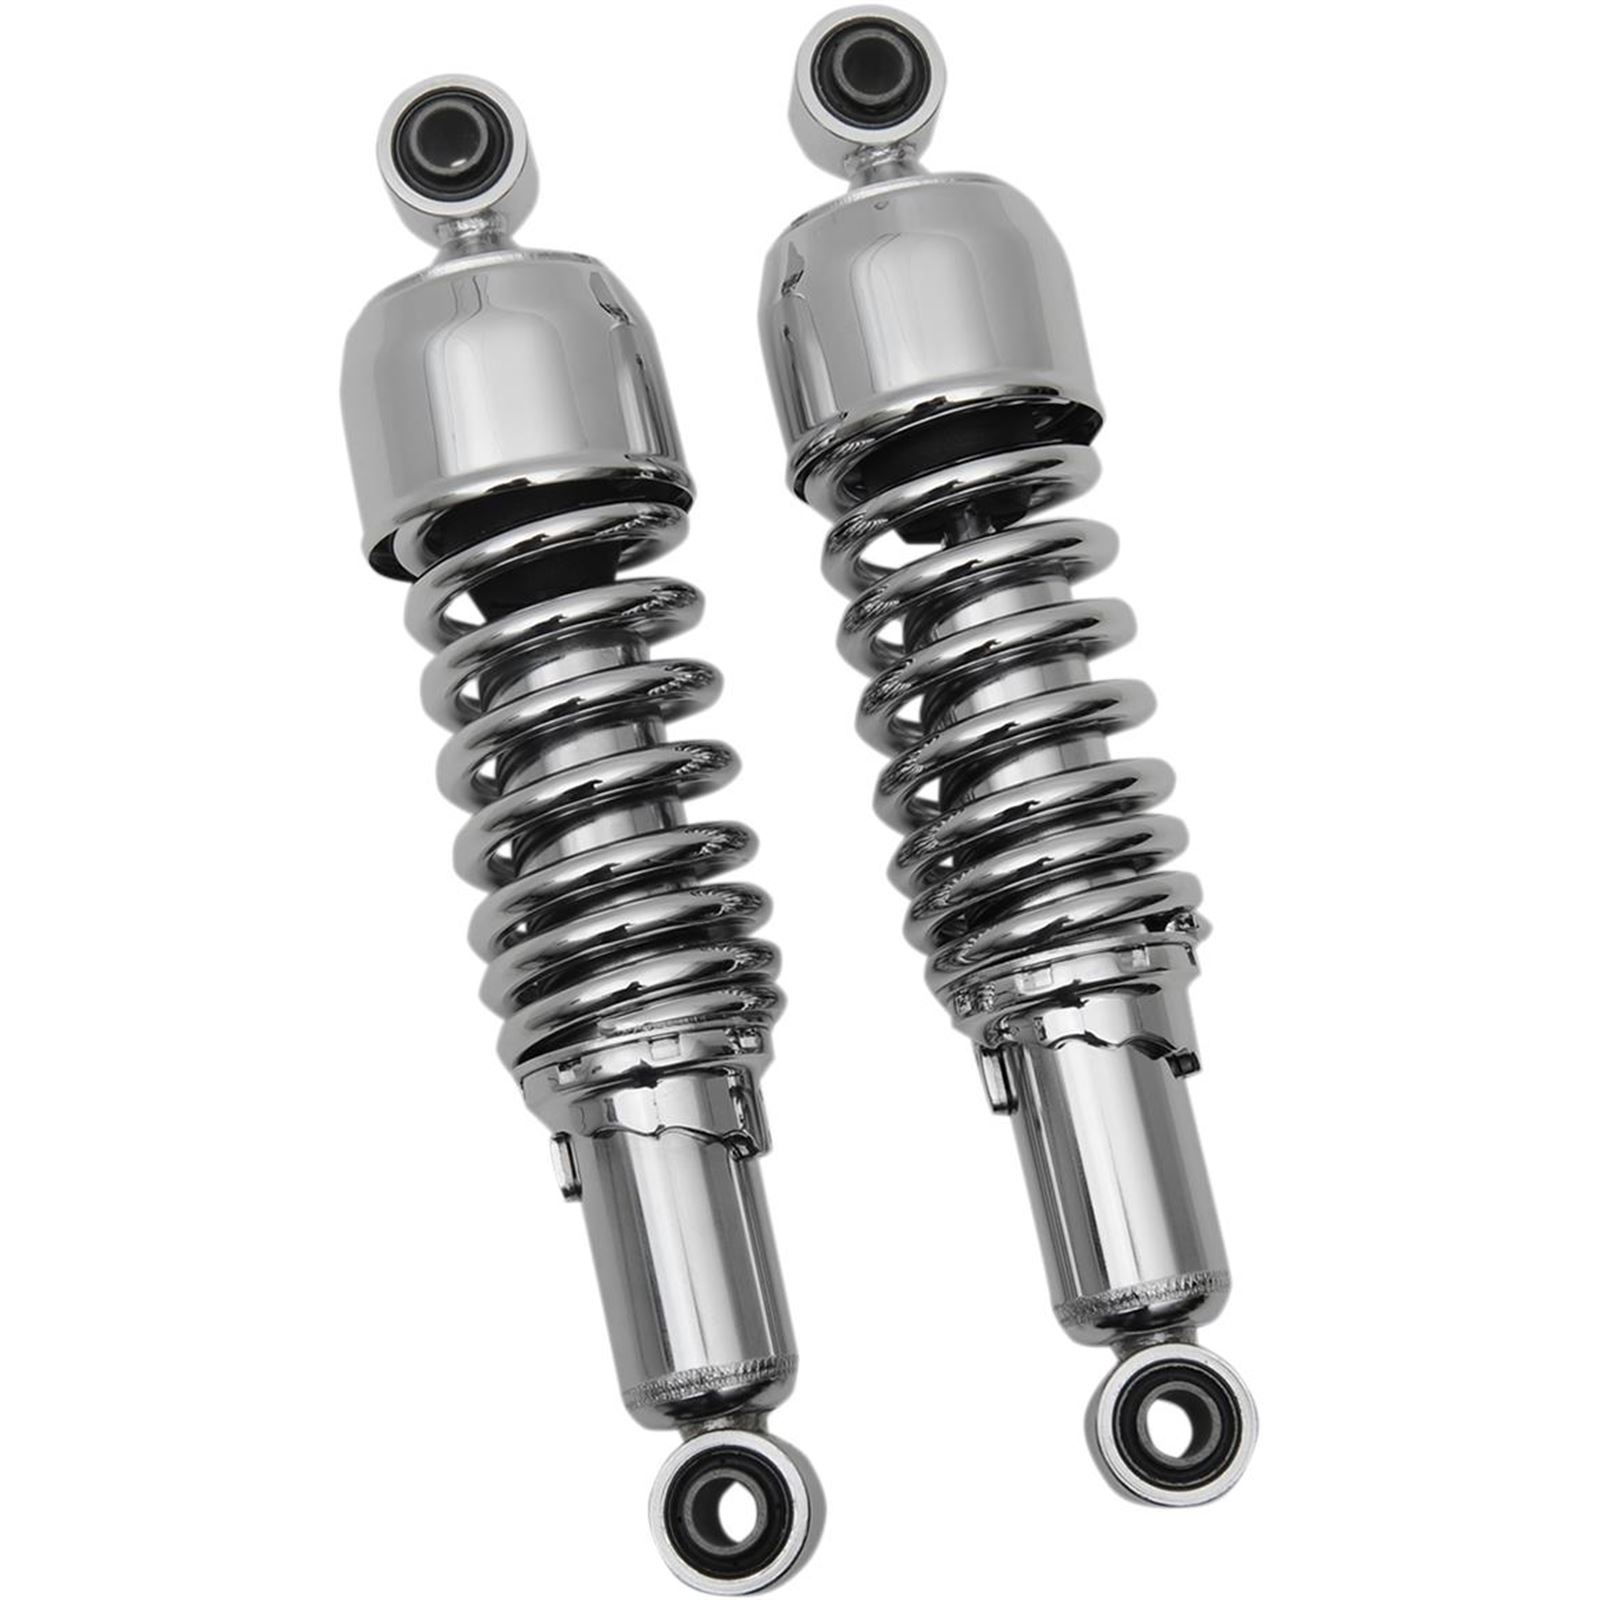 Drag Specialties Replacement Shock Absorbers - Chrome - 12"